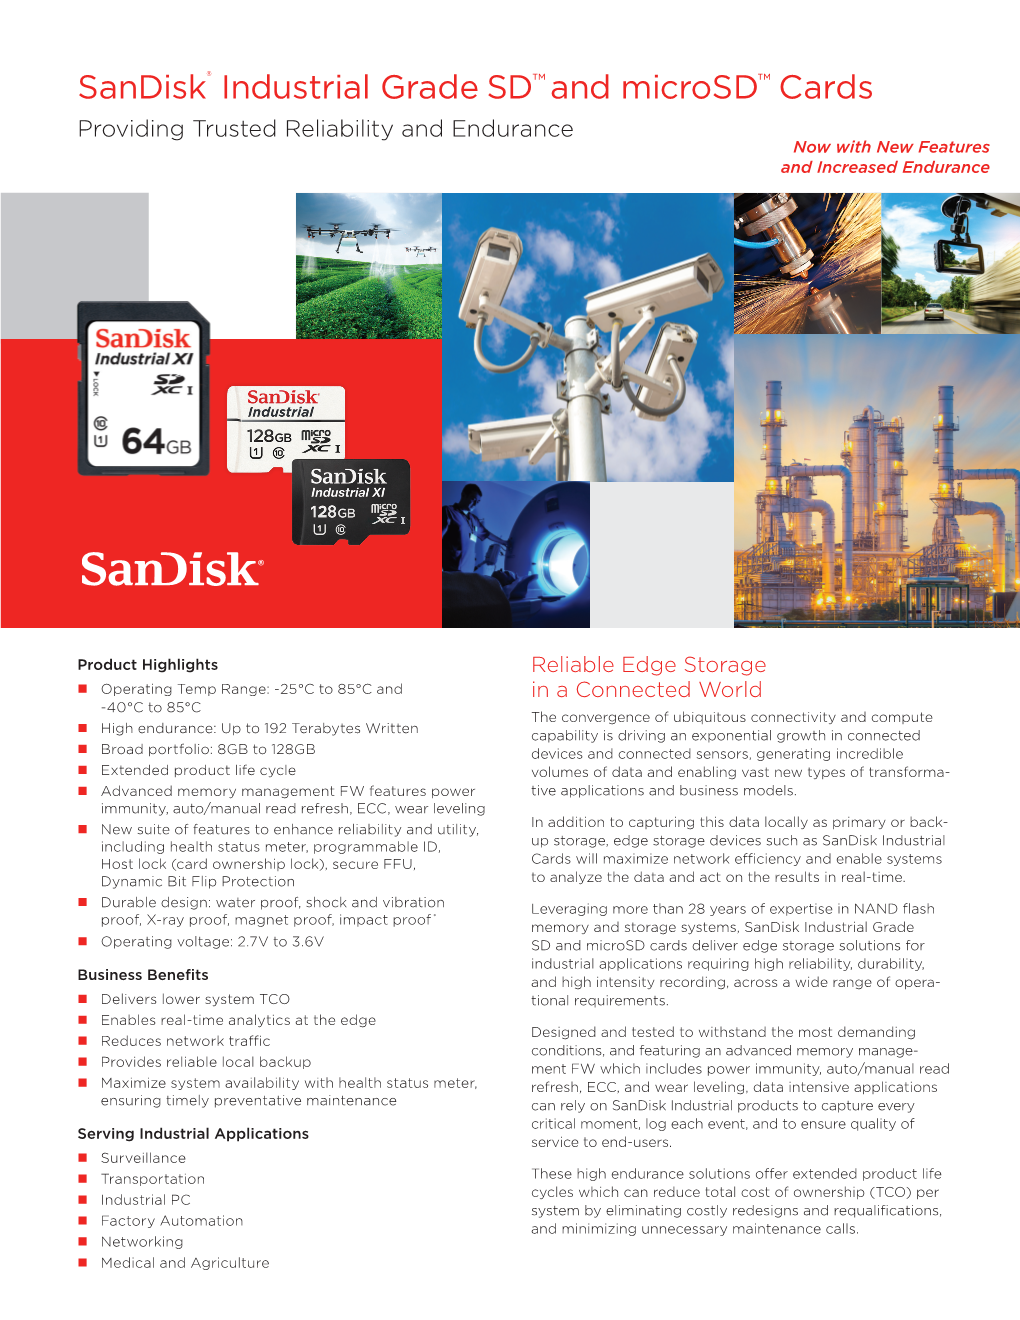 Sandisk® Industrial Grade SD™ and Microsd™ Cards Providing Trusted Reliability and Endurance Now with New Features and Increased Endurance